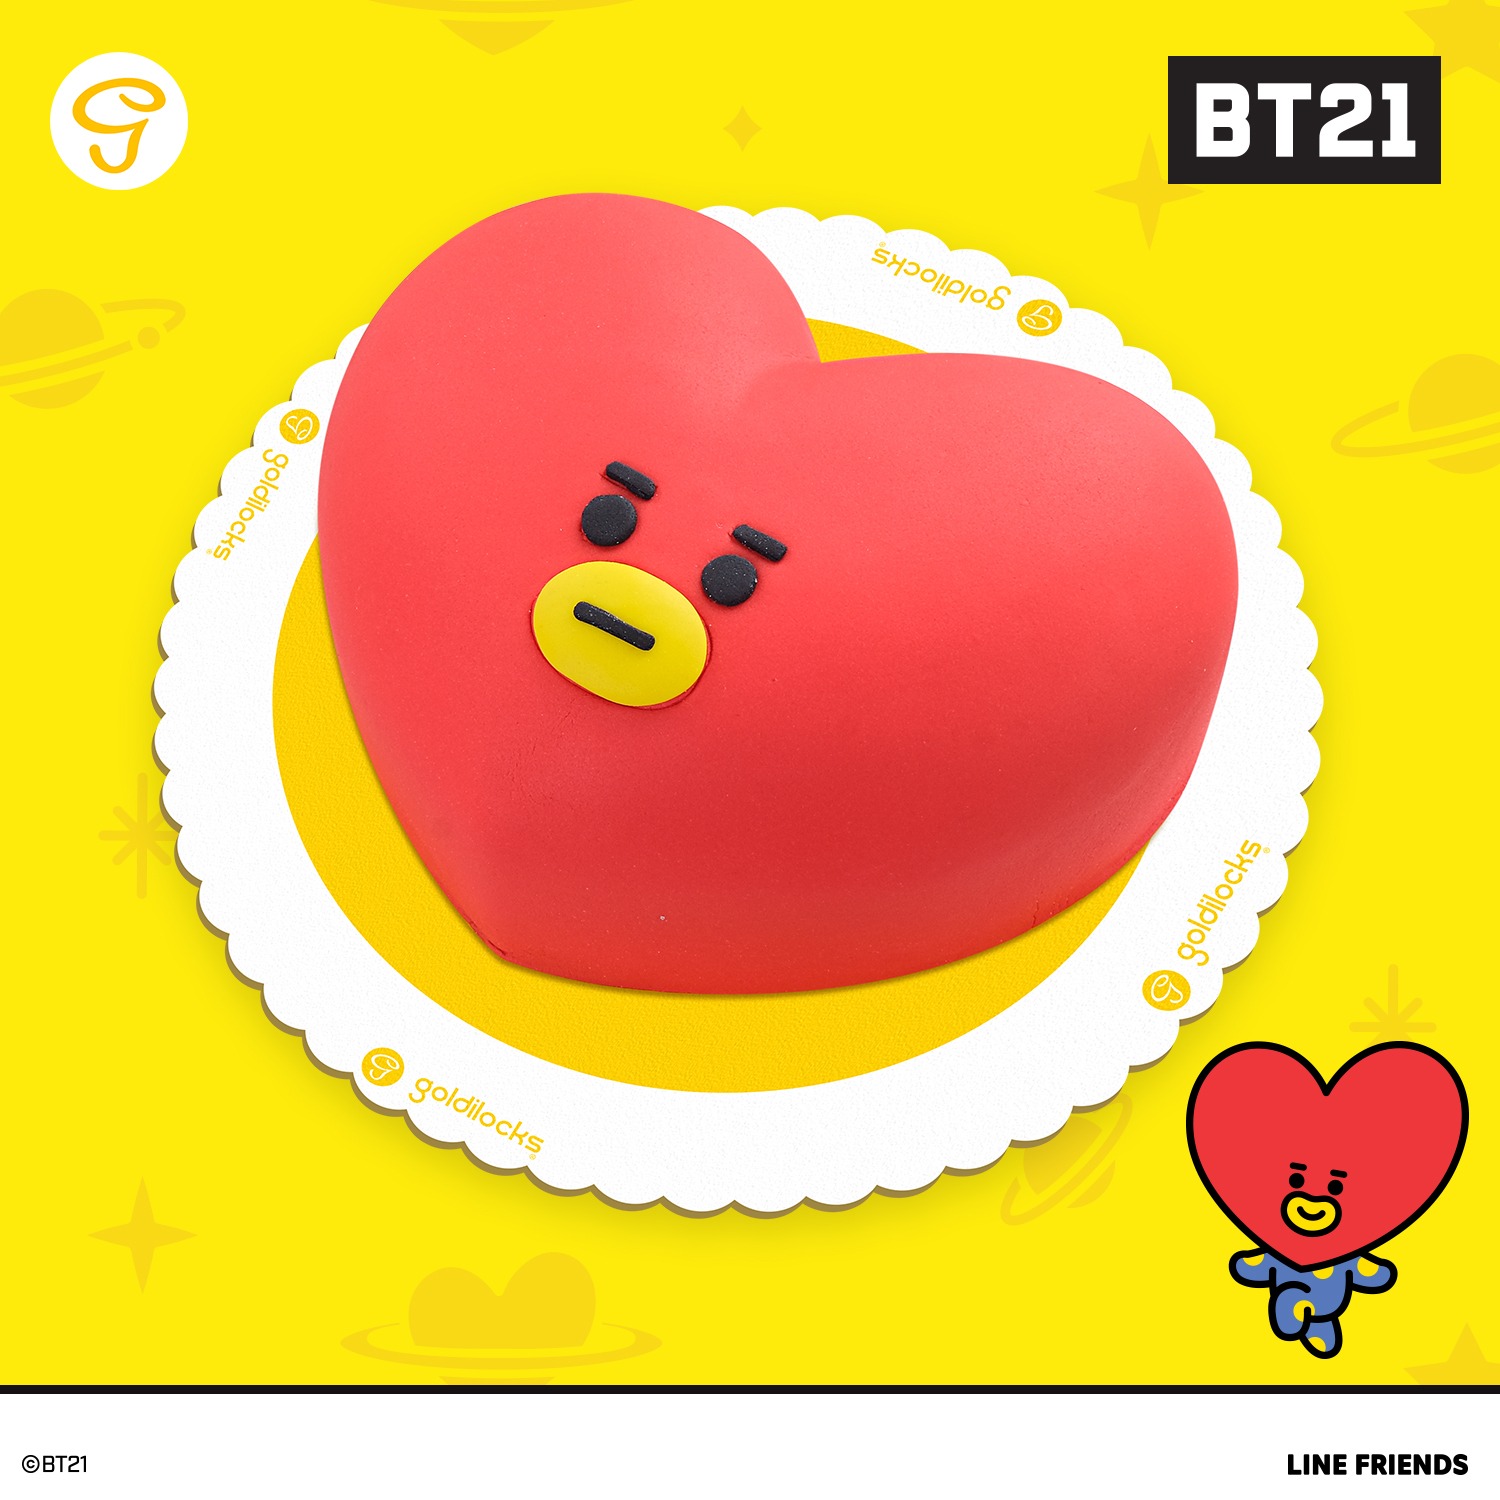 BT21 Cooky Cupcake Topper | Bts cake, Cupcake cakes, Desserts with biscuits